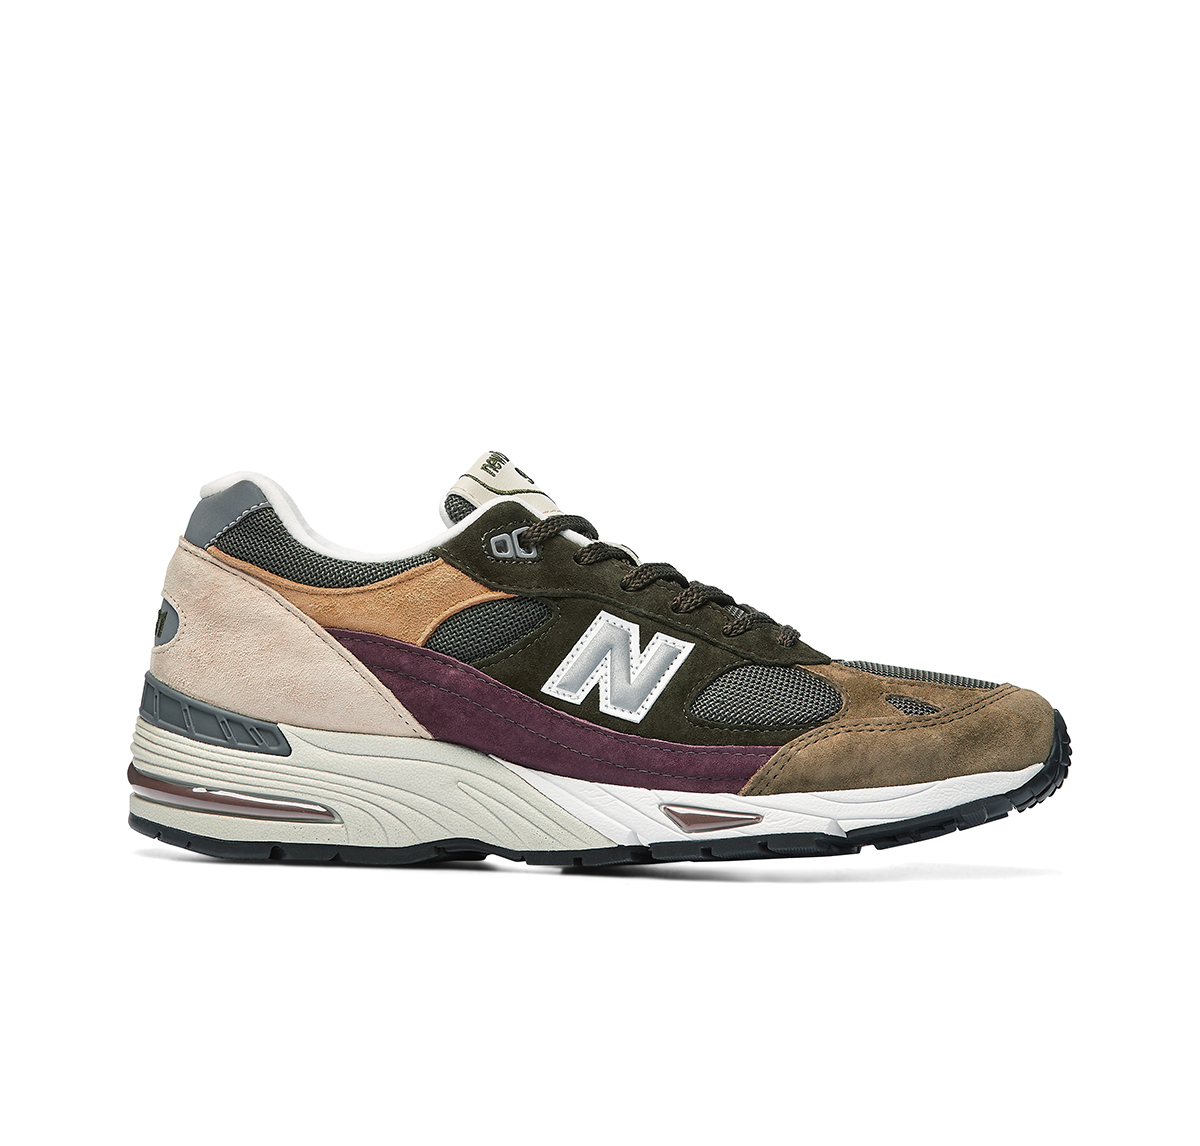 New Balance 991 - Desaturated - Made In UK